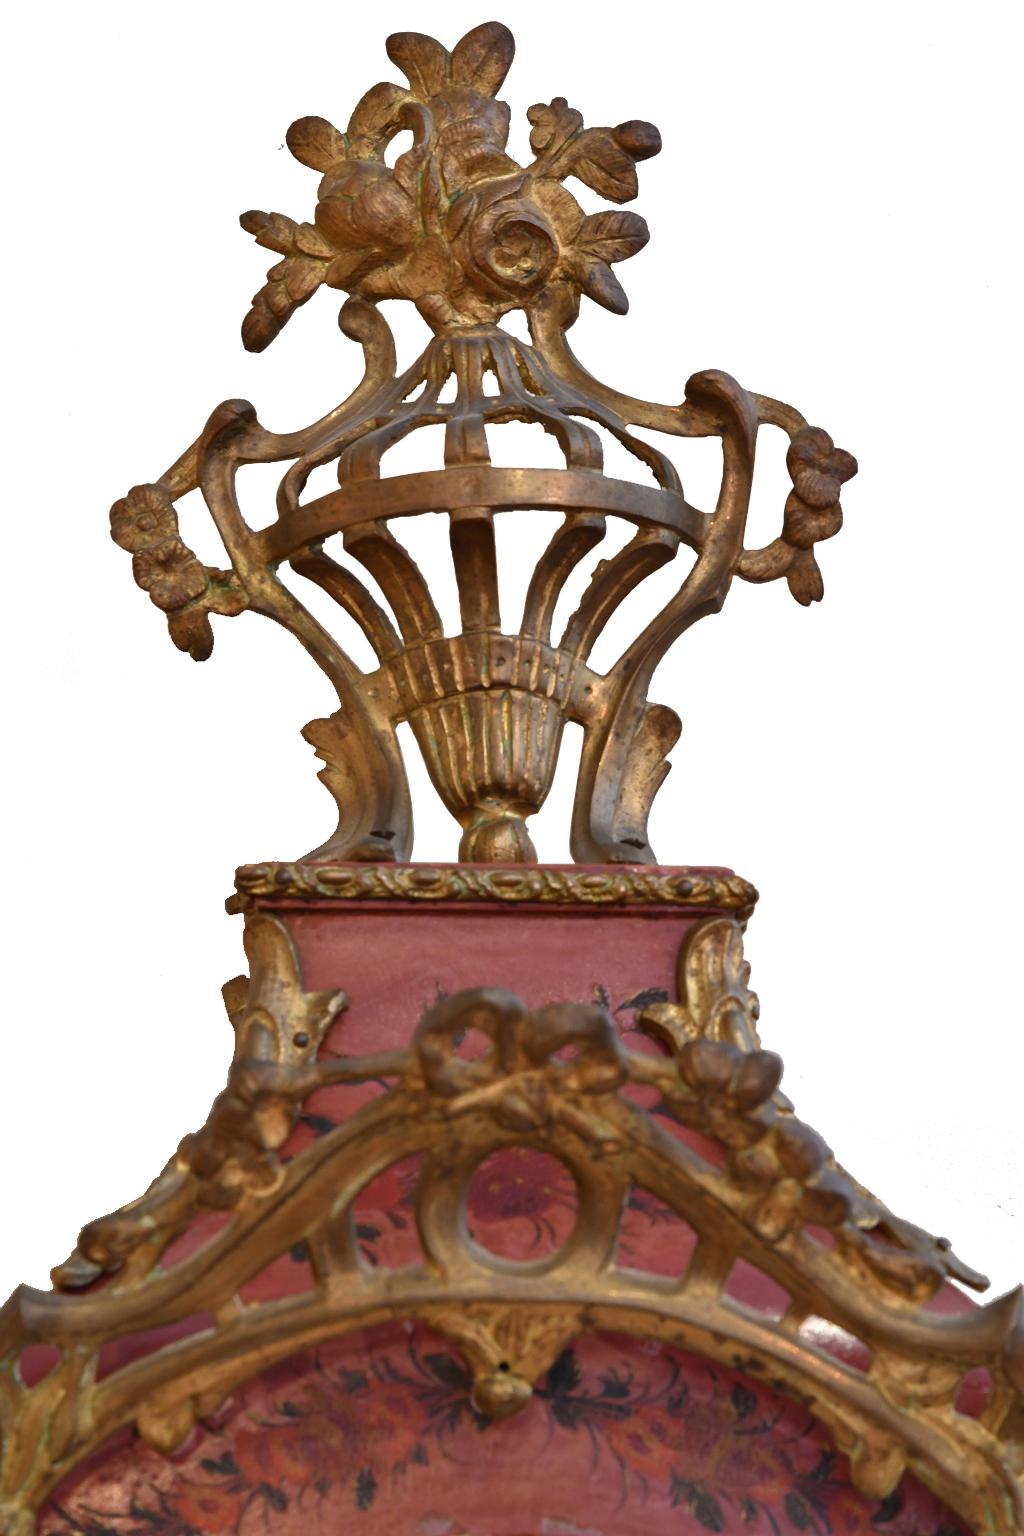 18th Century French Louis XV Mantel Clock w/ Ormolu & Painted Flowers by Perrard In Good Condition For Sale In Miami, FL